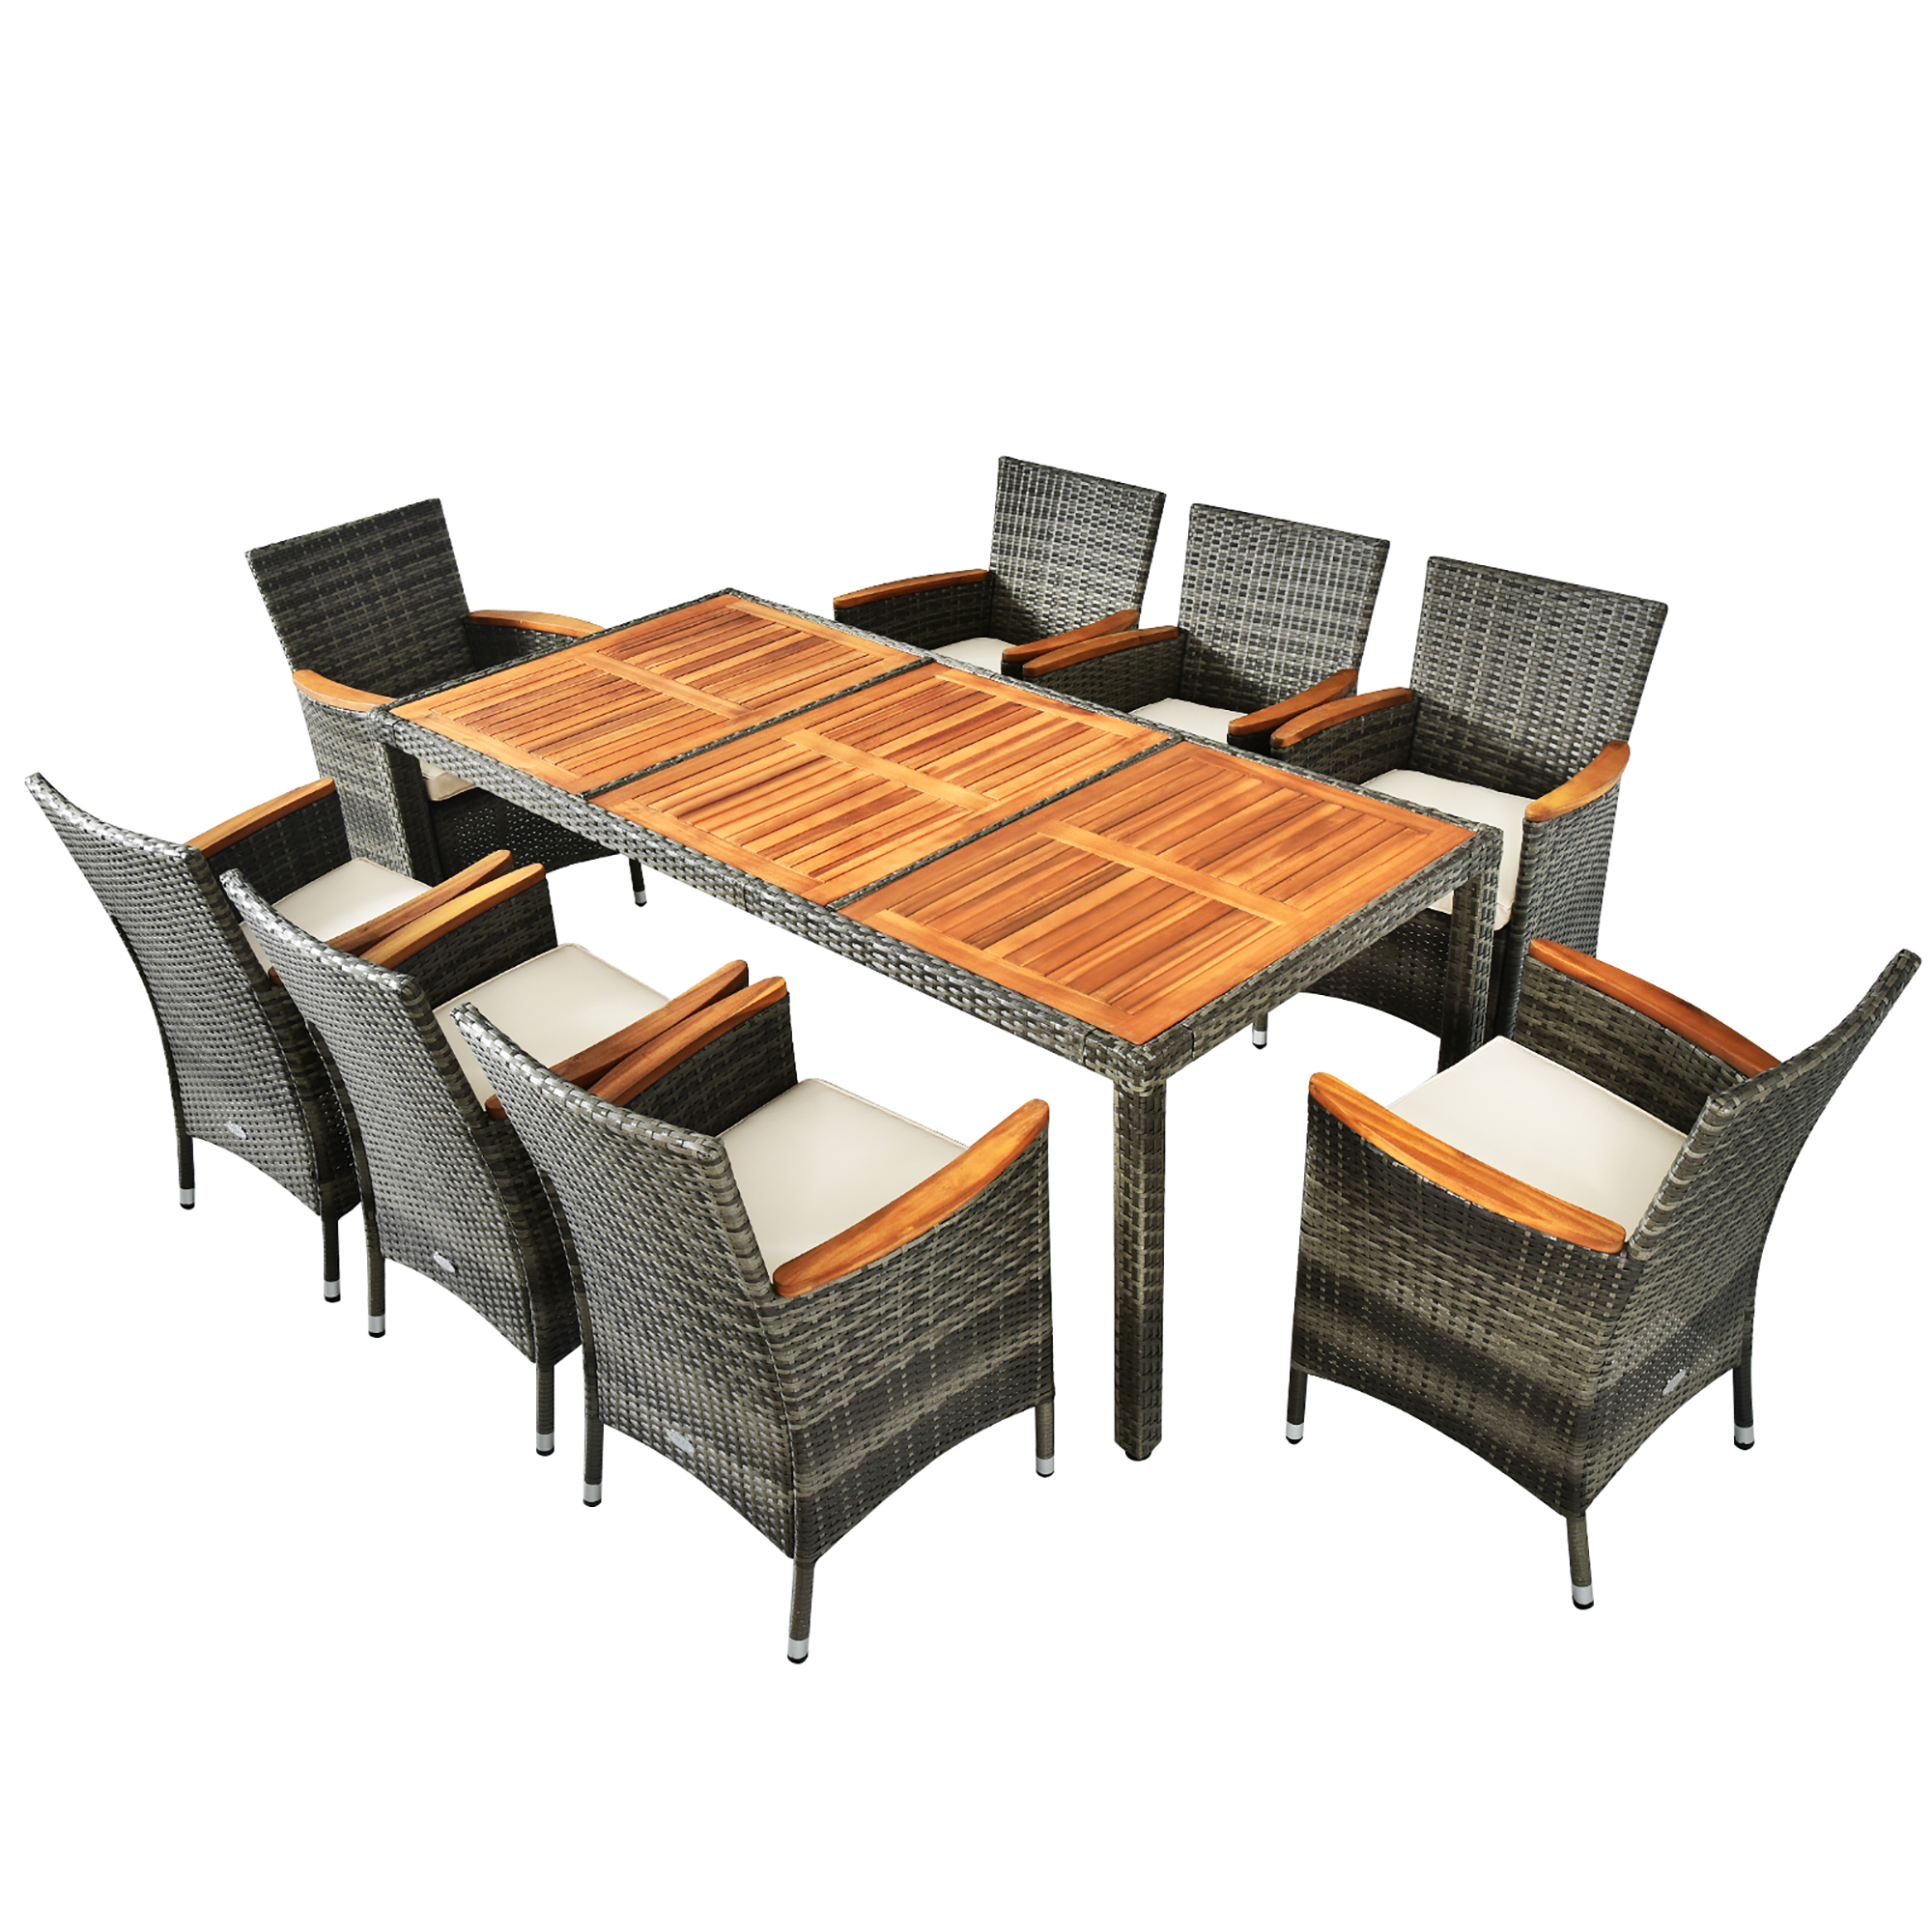 Costway 9PCS Patio Rattan Dining Set Acacia Wood Table Cushioned Chair Mix Gray